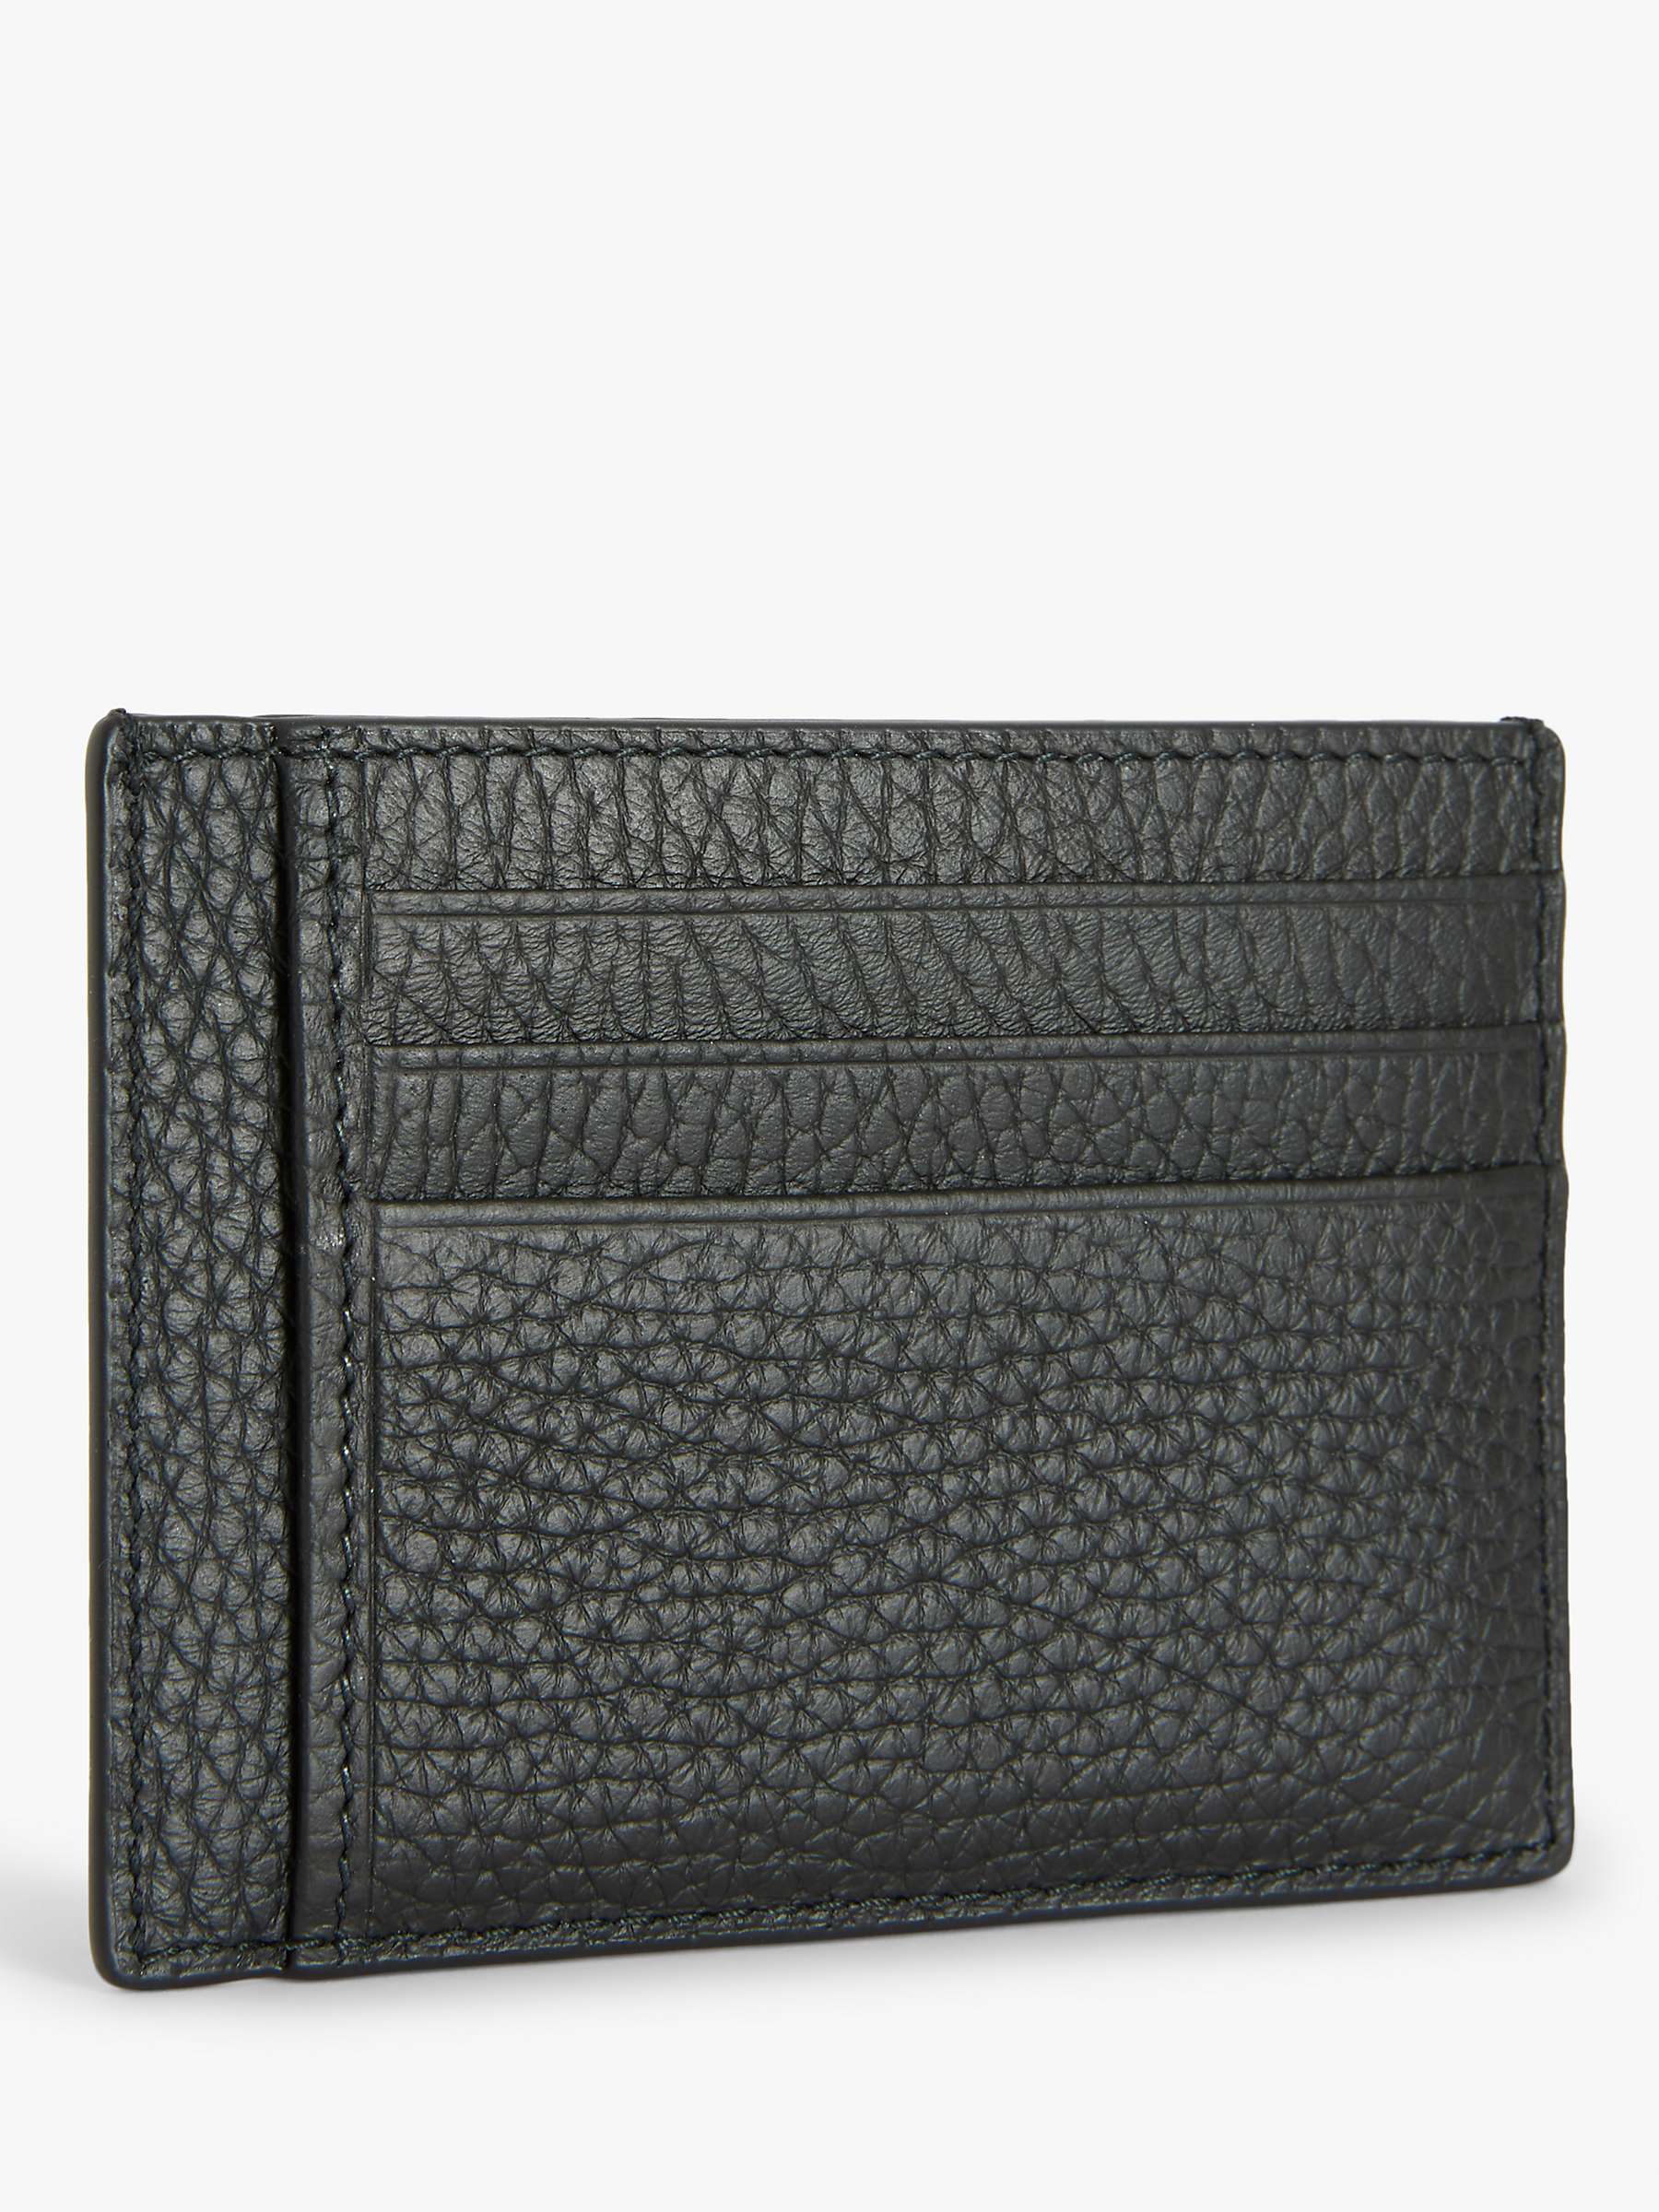 Buy BOSS Crosstown Grained Italian Leather Eight Card Wallet, Black Online at johnlewis.com